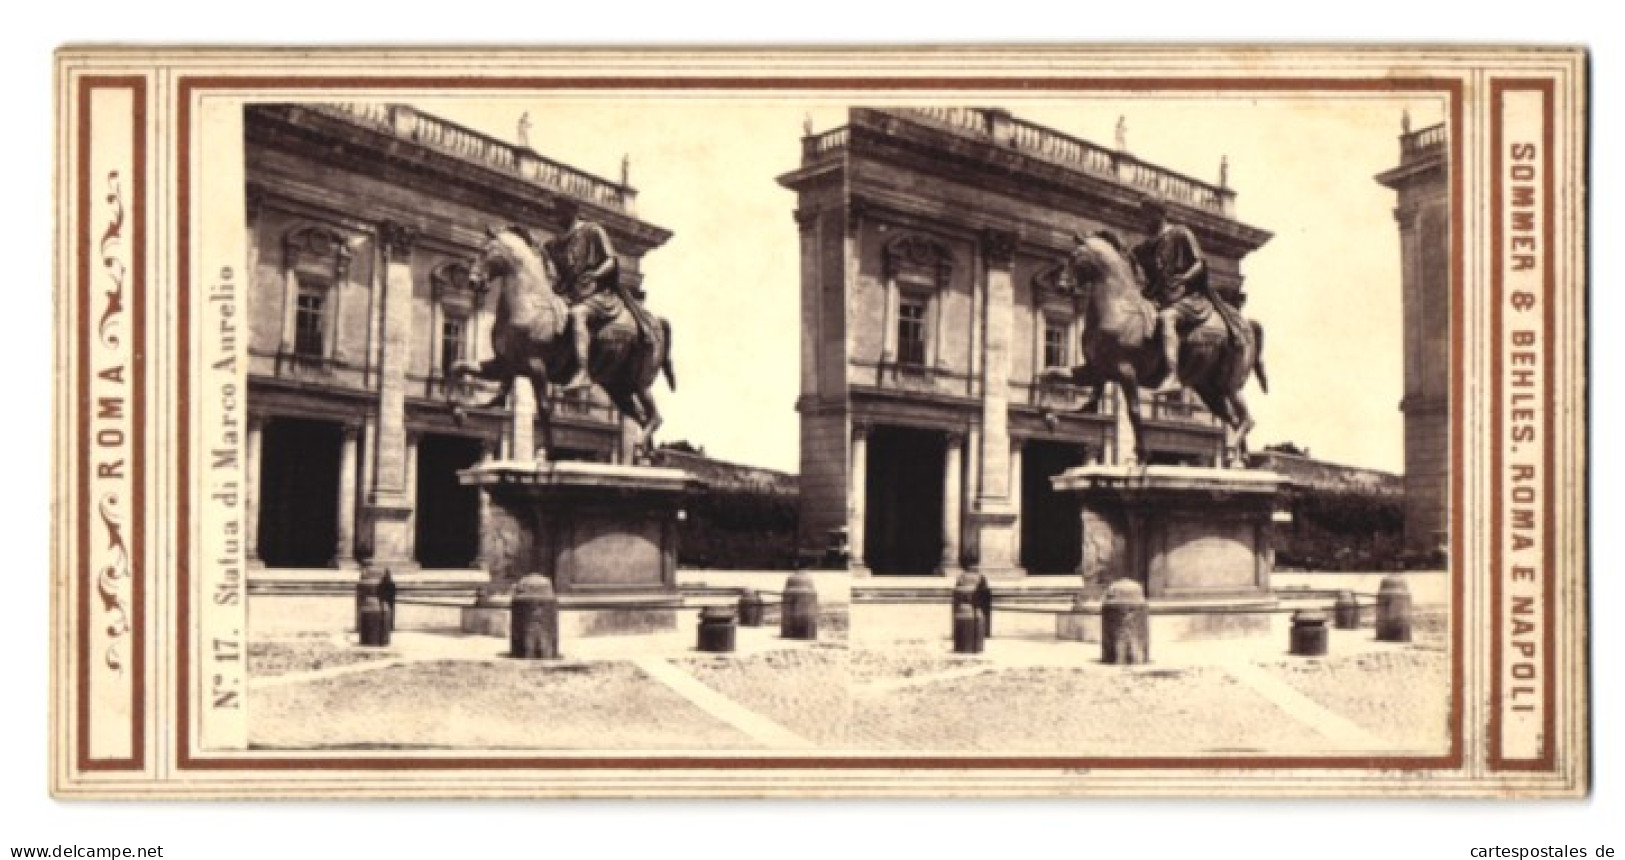 Stereo-Foto Sommer & Behles, Roma, Ansicht Roma, Statue Di Marco Aurelio  - Stereoscoop